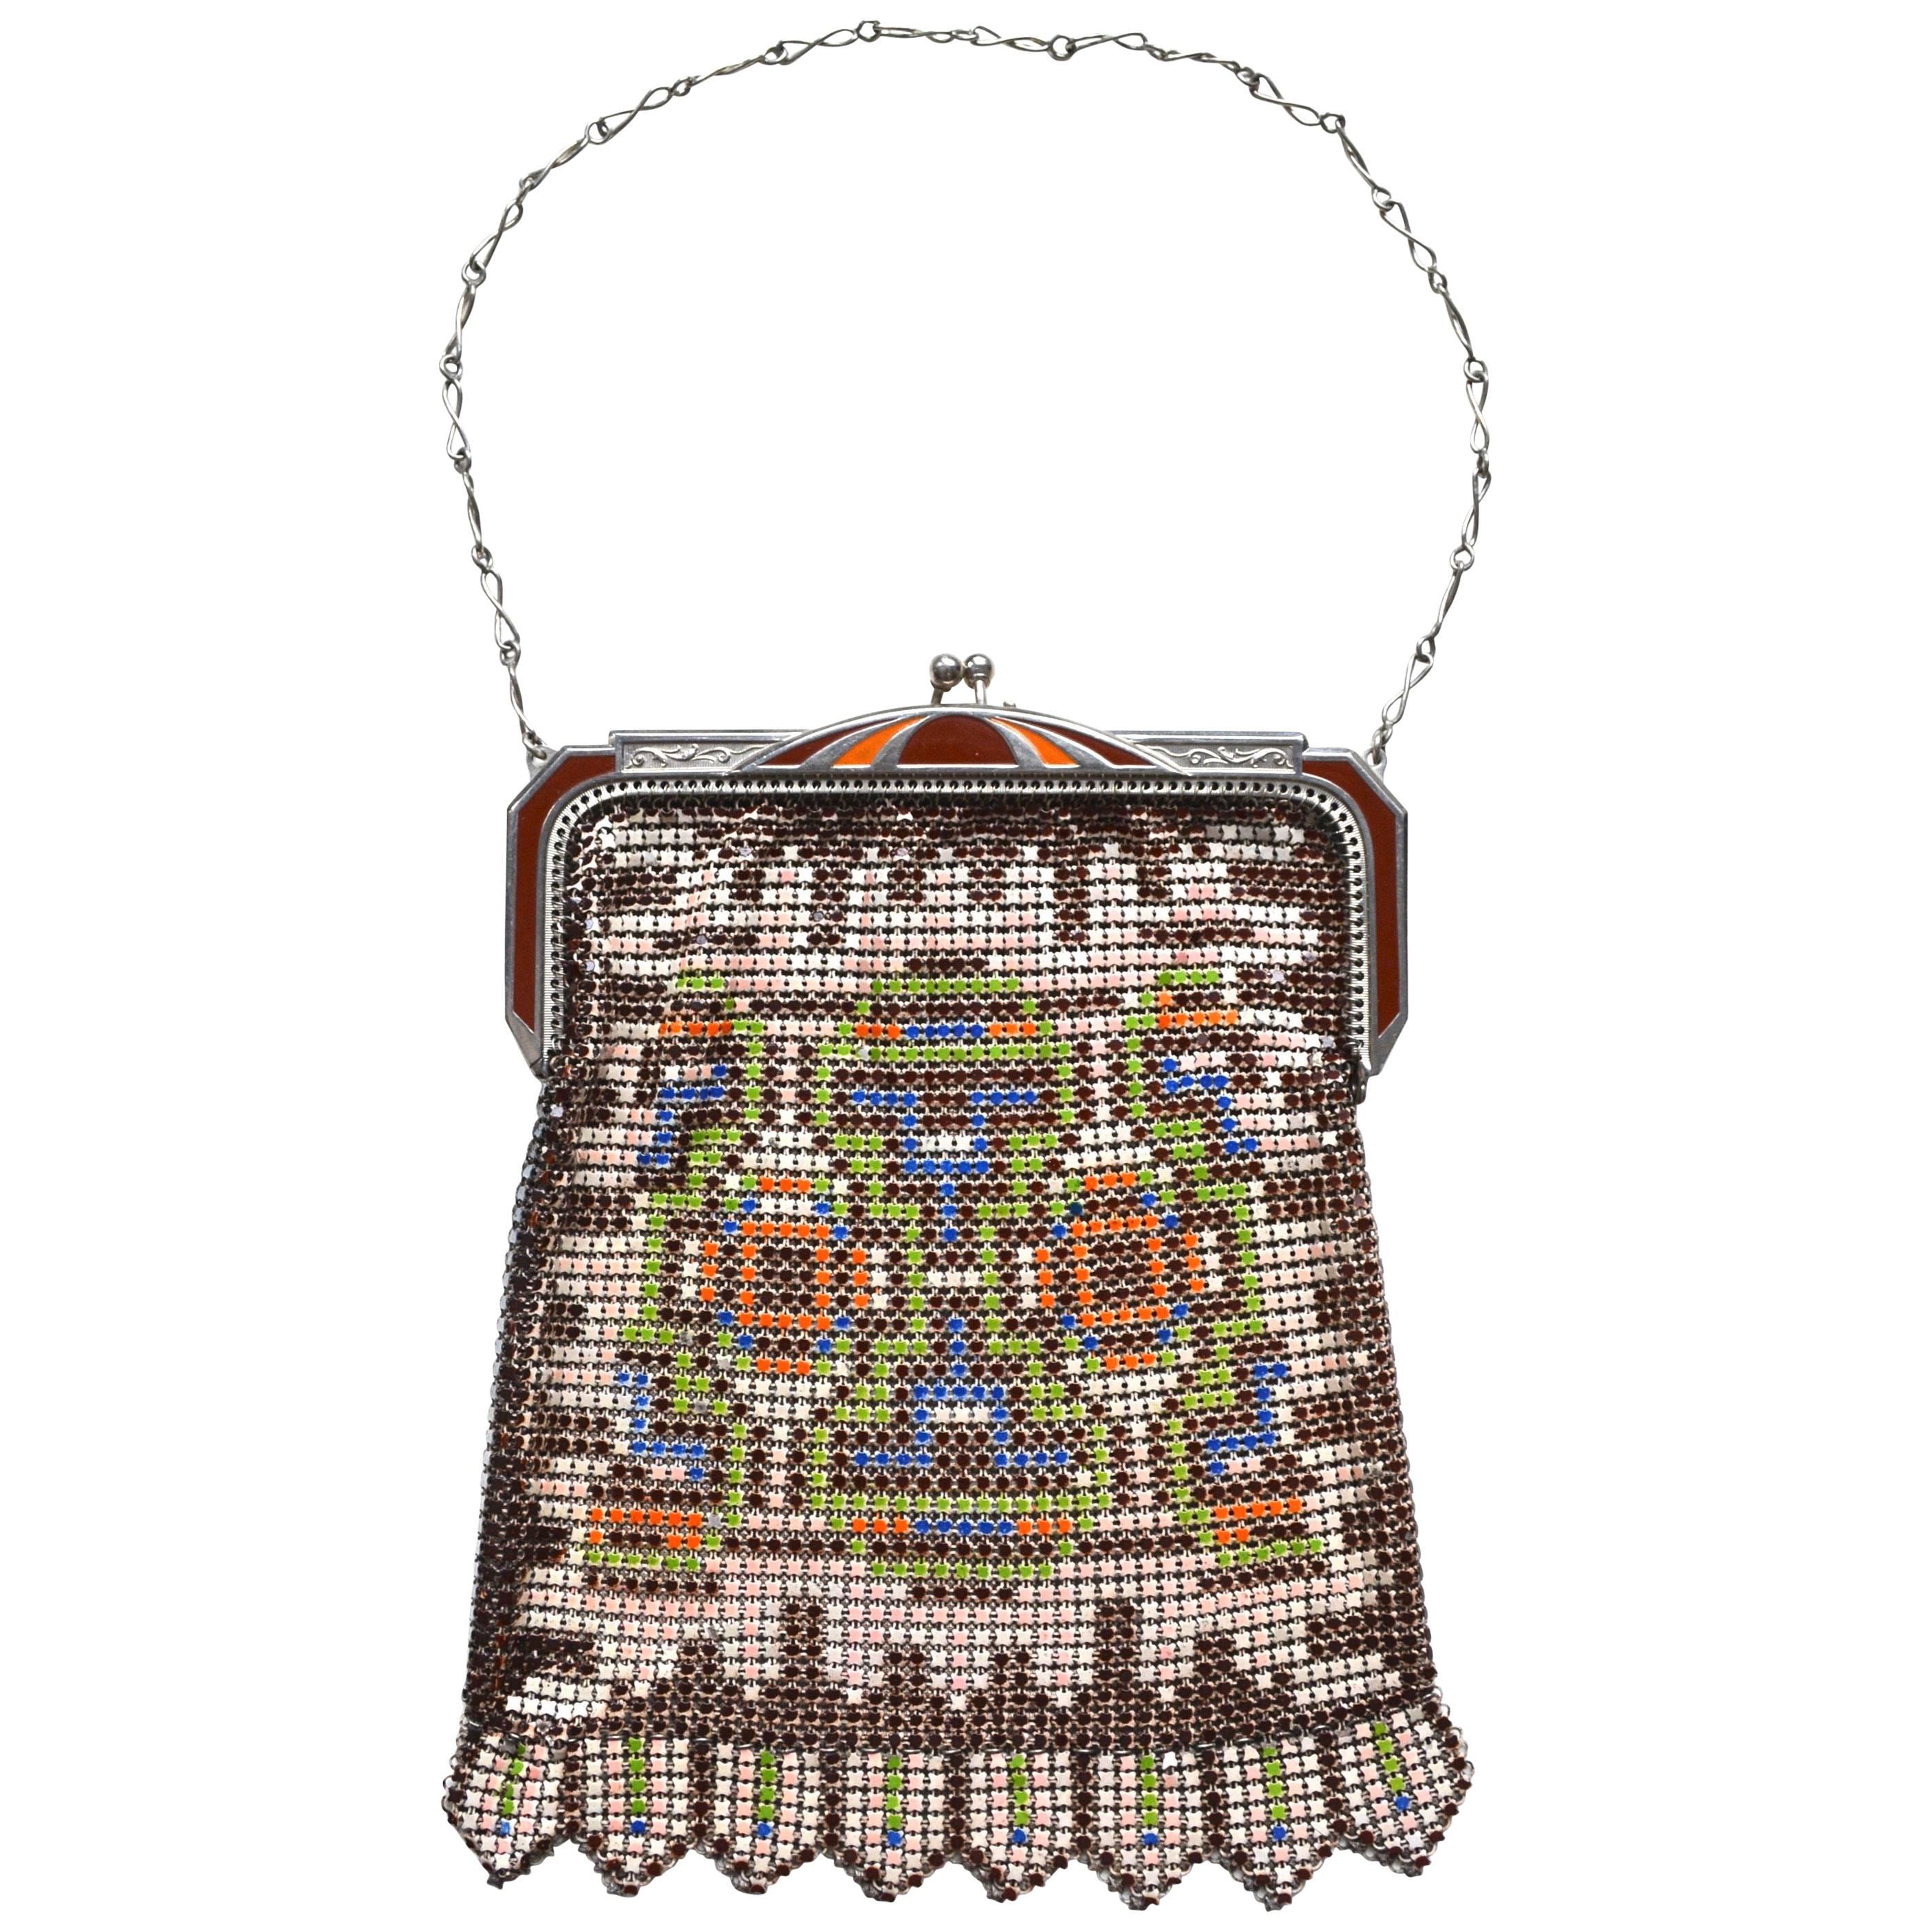 1920s Whiting and Davis Colorful Mesh Bag For Sale